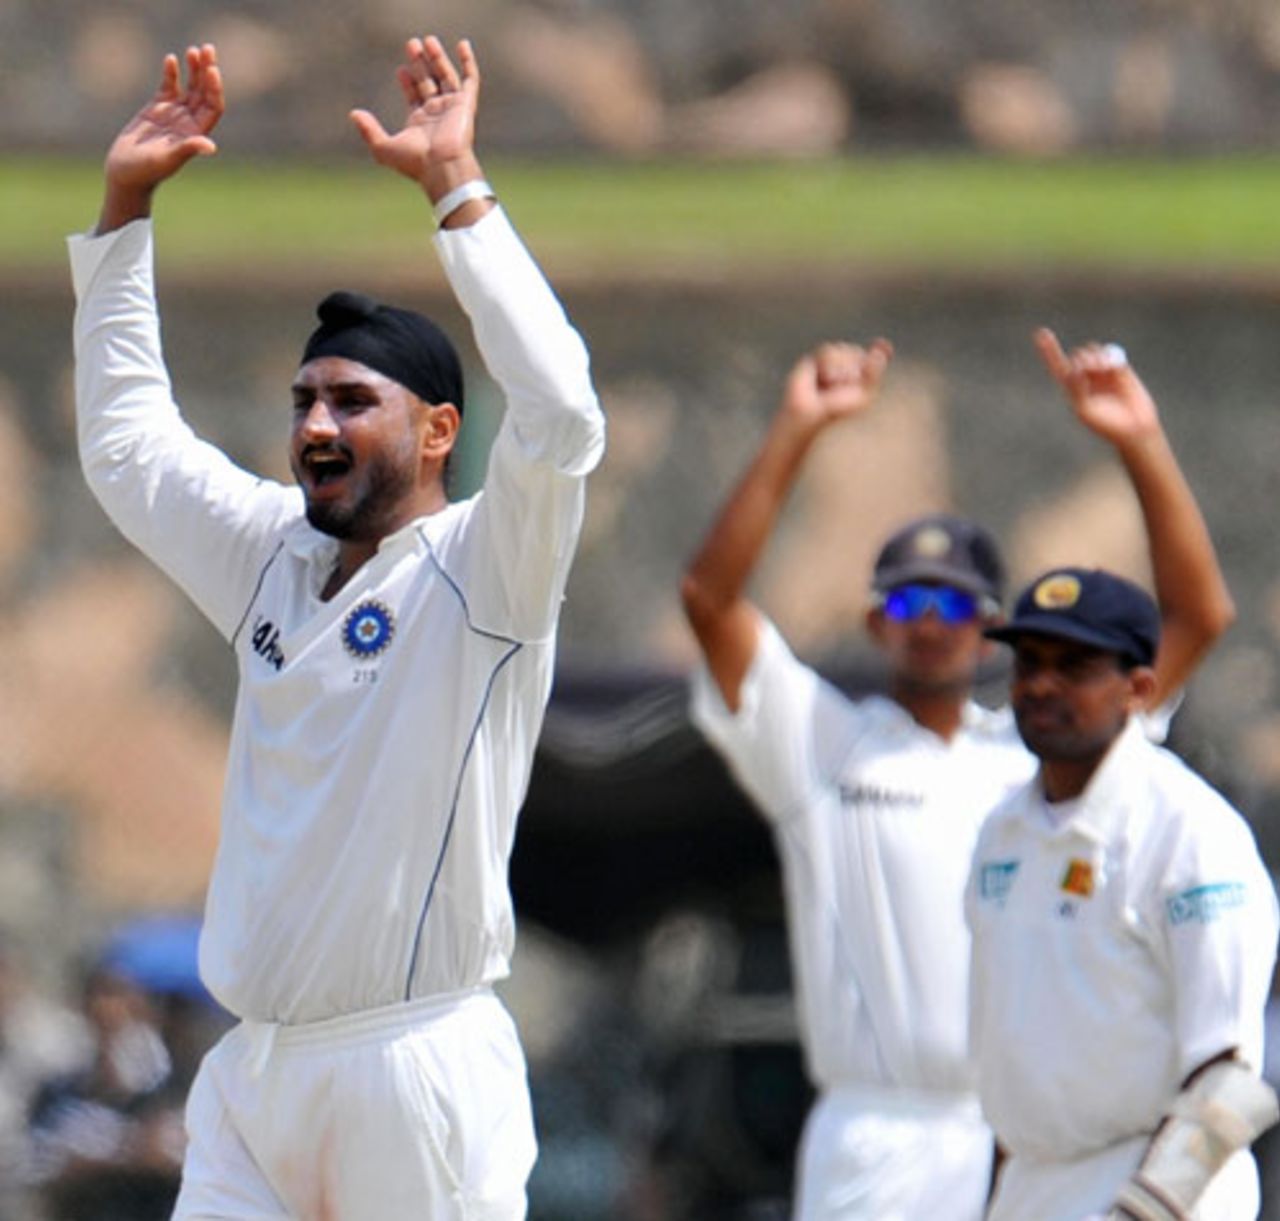 Harbhajan Singh makes a strident lbw appeal, Sri Lanka v India, 2nd Test, Galle, 4th day, August 3, 2008
